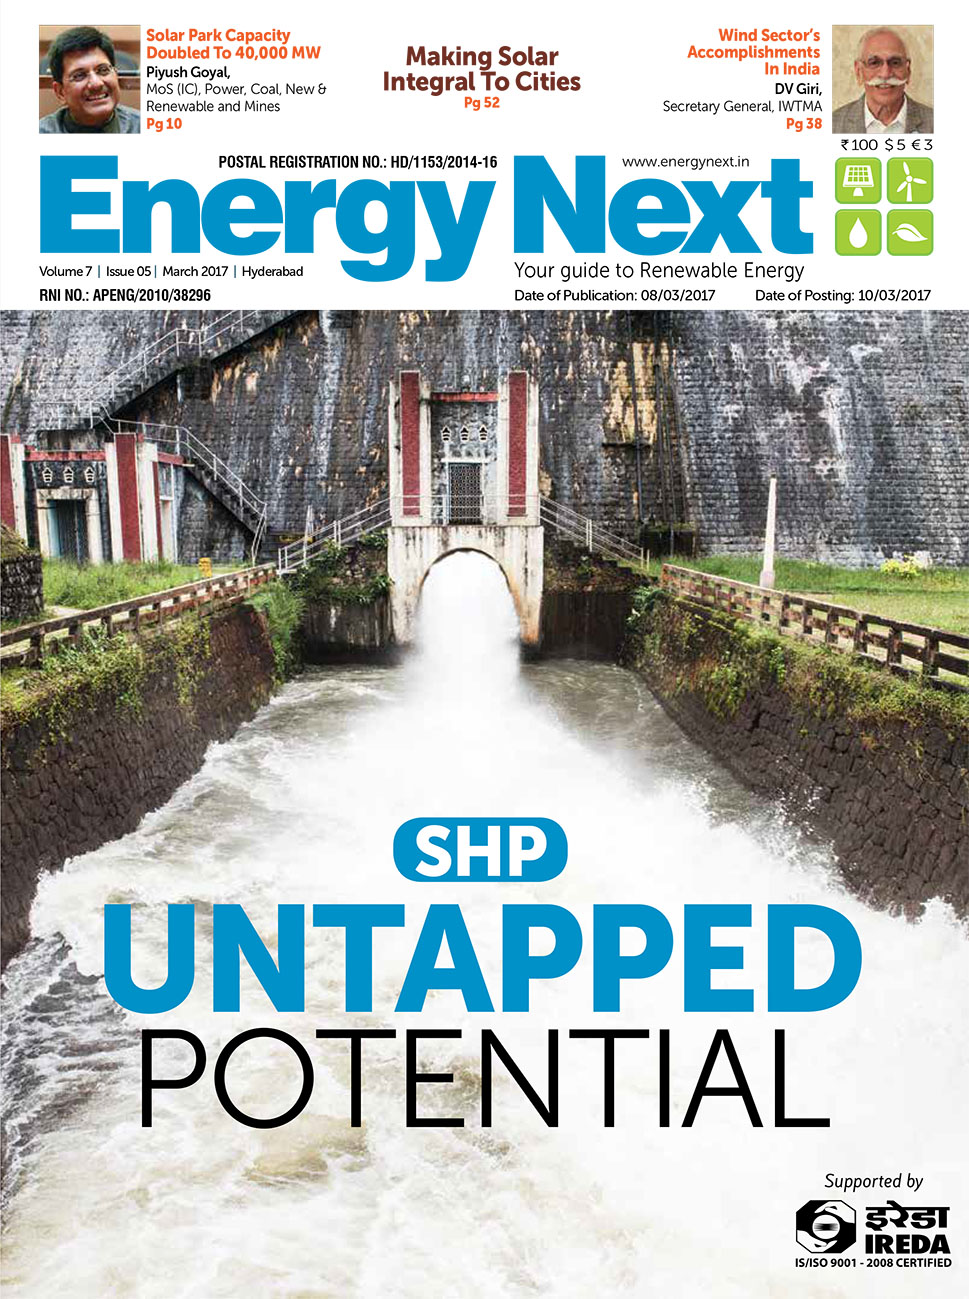 EnergyNext volume 7 issue 5 march 2017